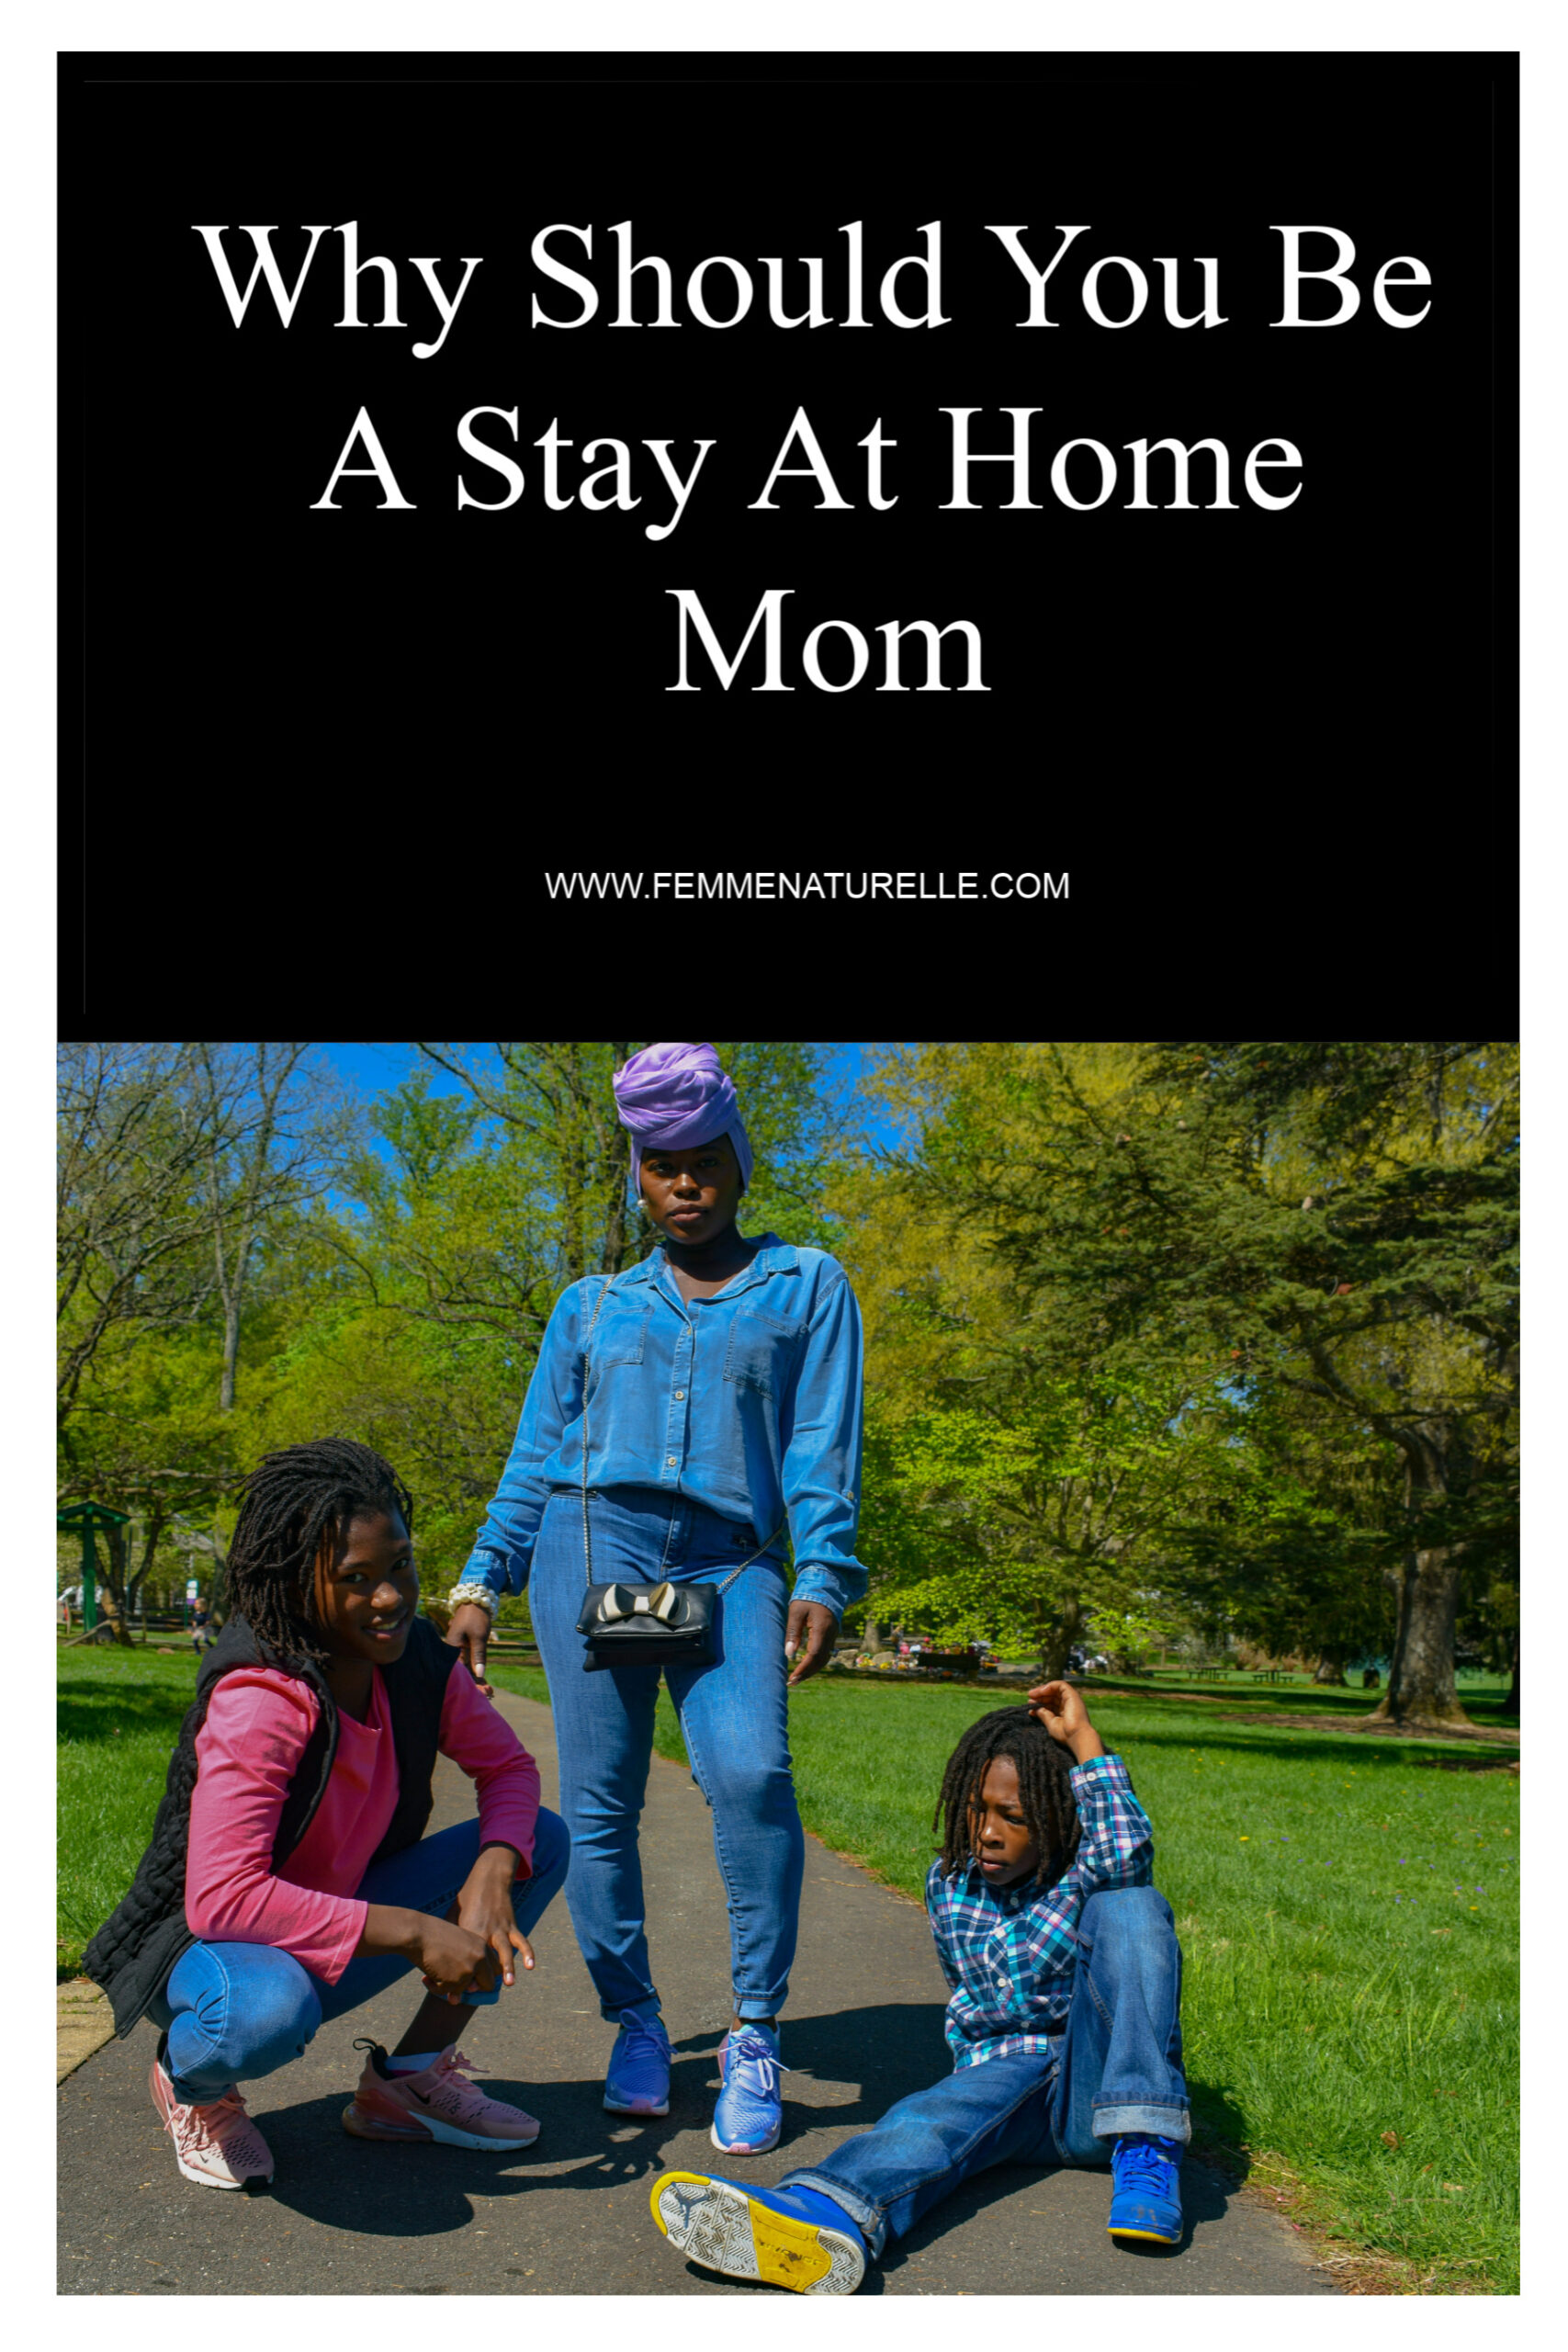 Why Should You Be A Stay At Home Mom